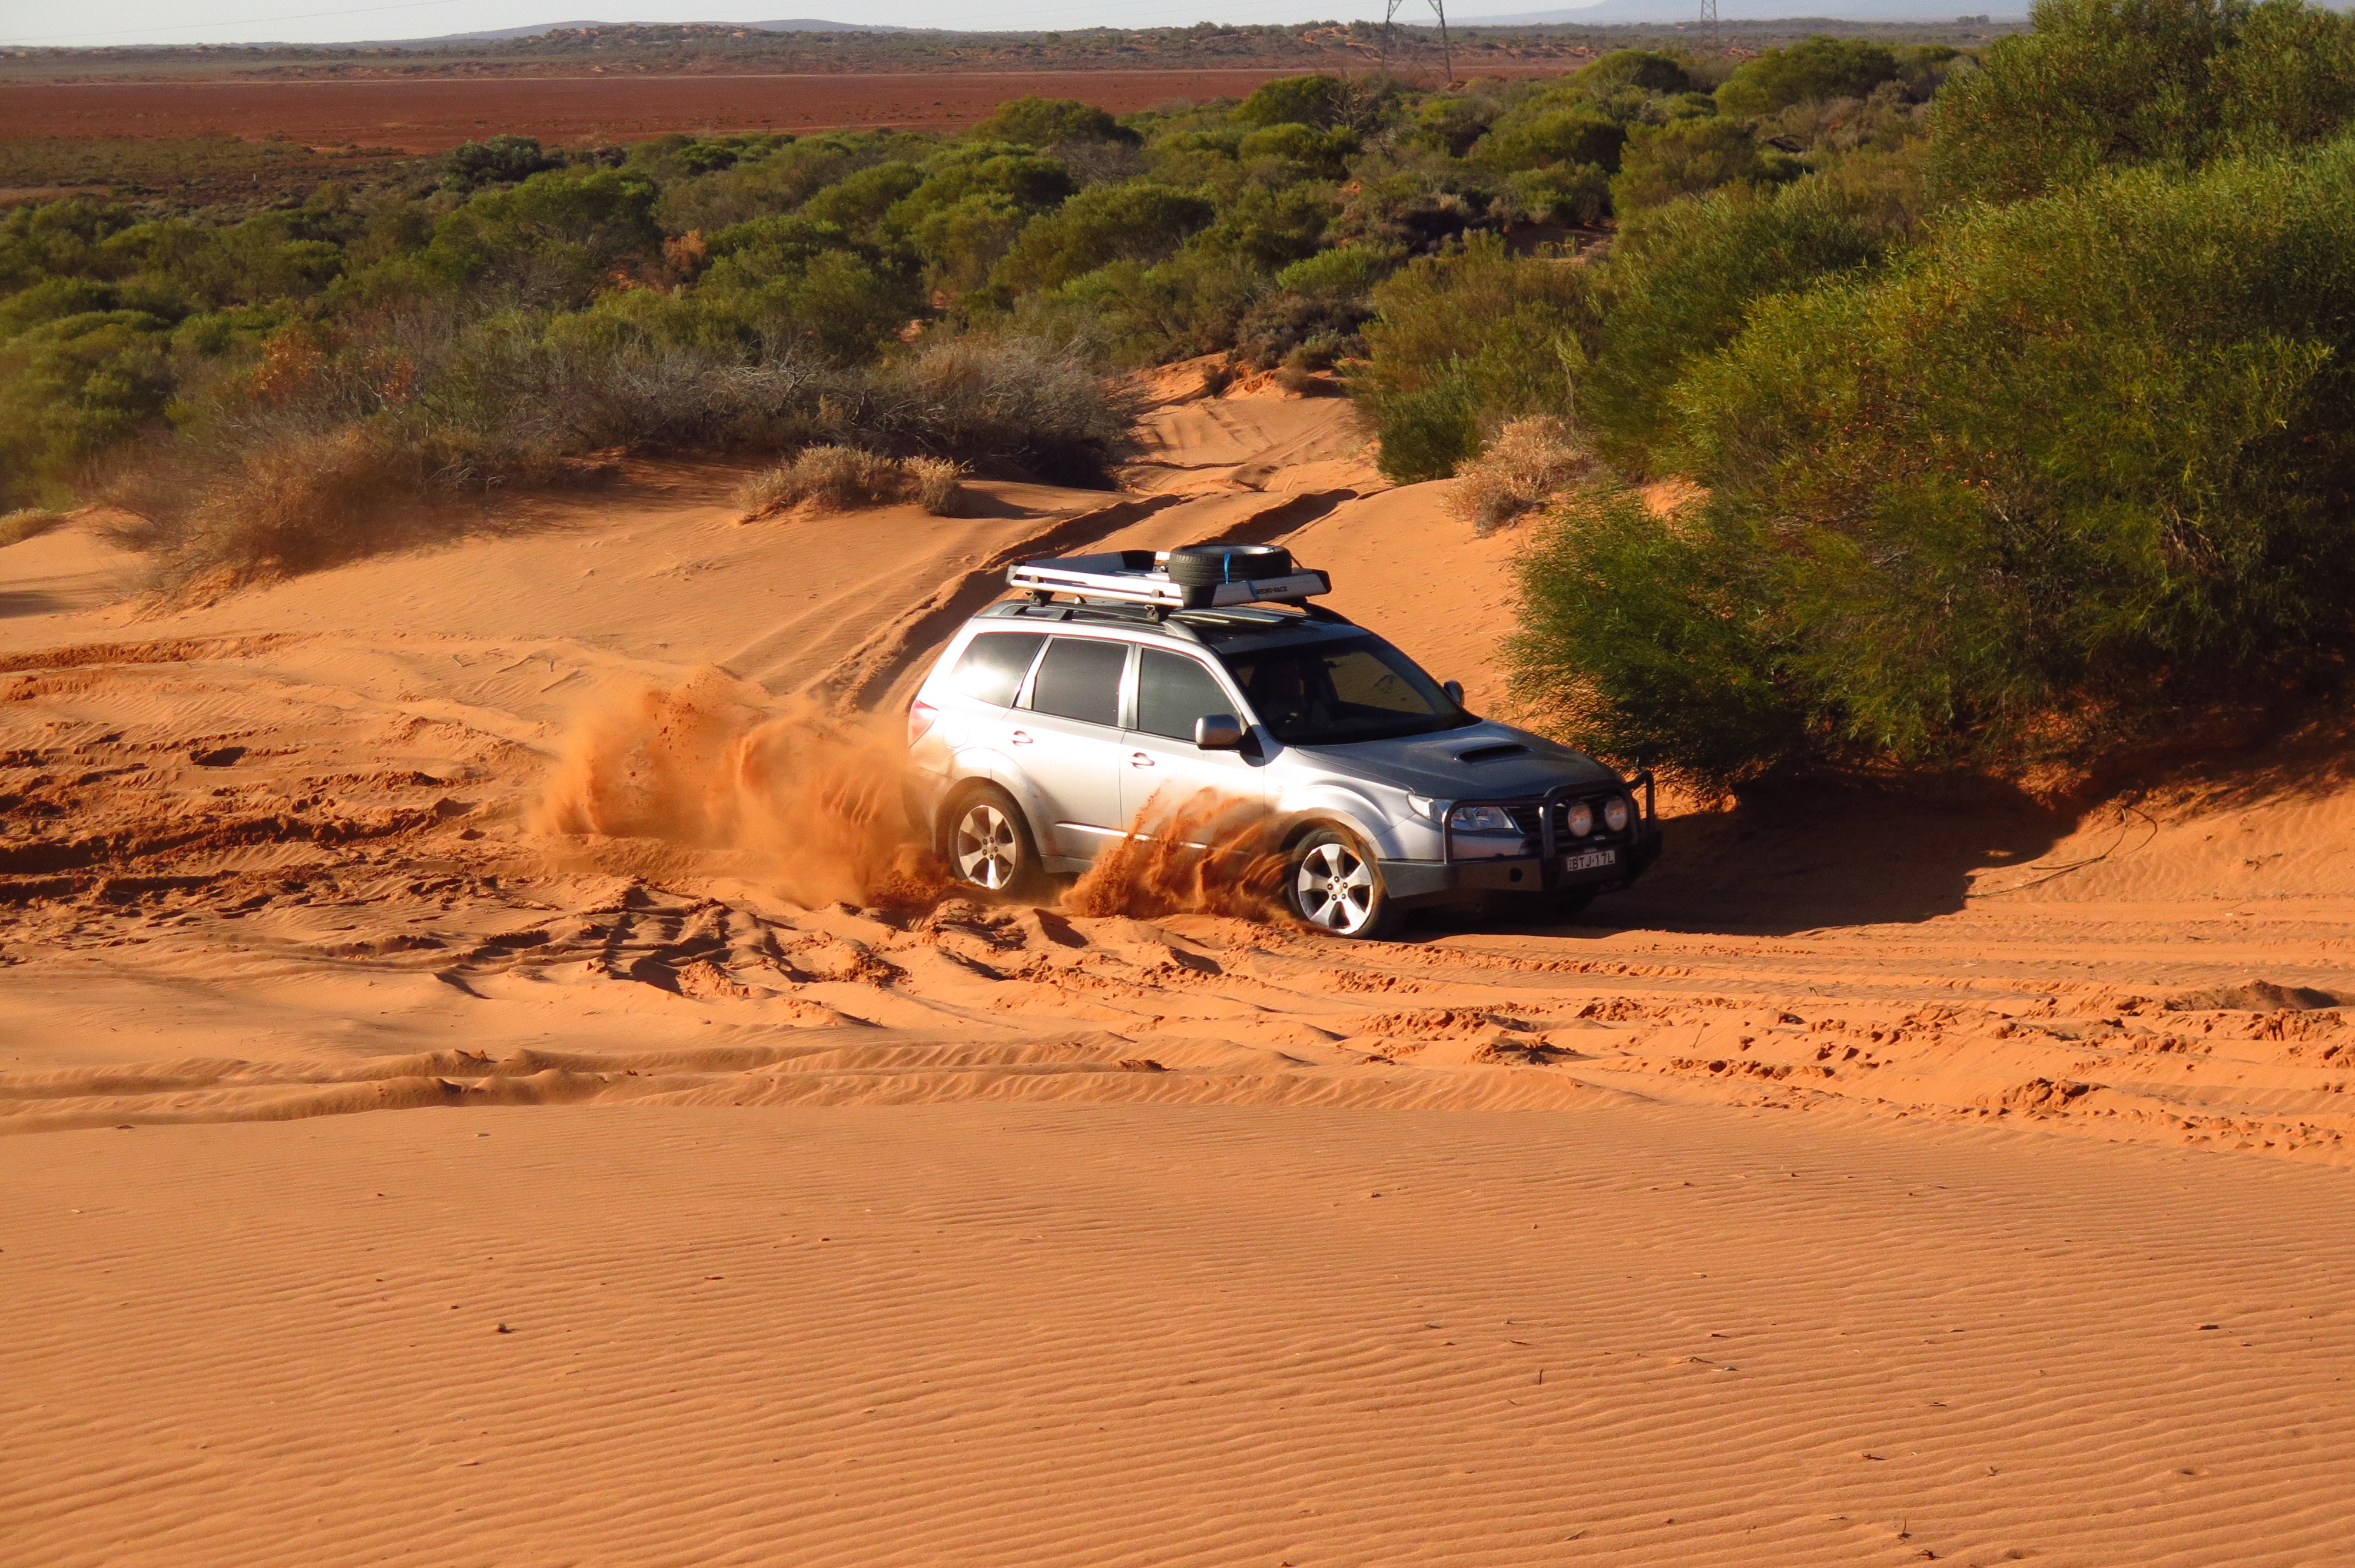 Learning correct vehicle control in soft sand dunes!